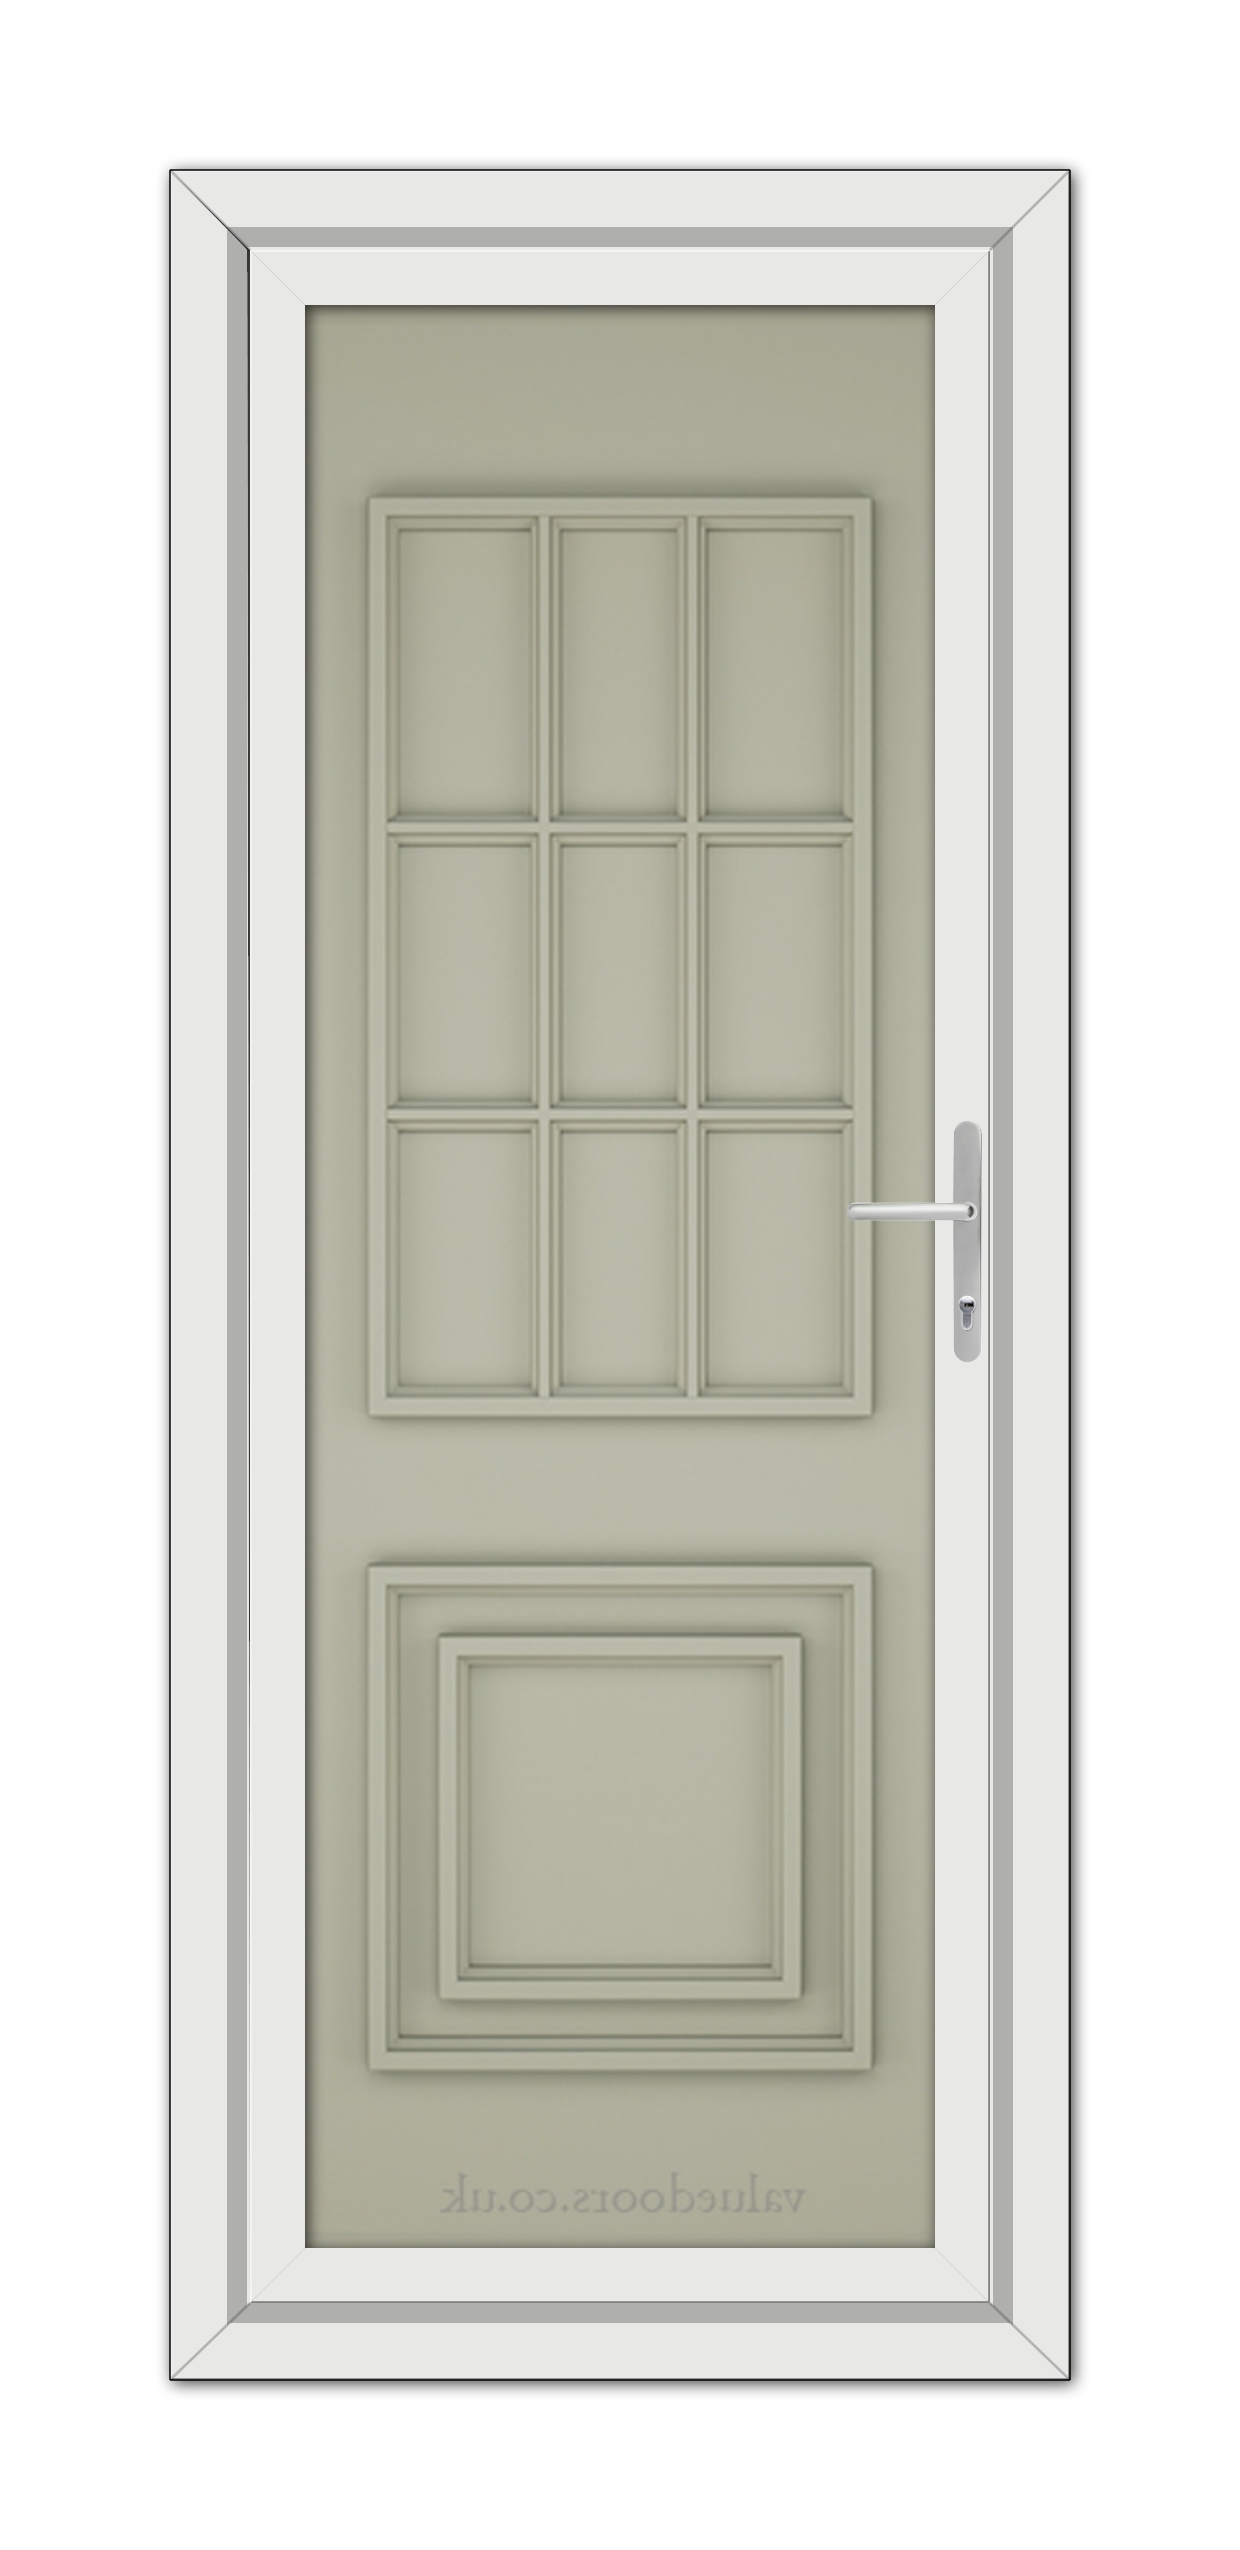 An elegant Agate Grey Cambridge One Solid uPVC door with a white frame, featuring a rectangular design with fifteen panels and a metallic handle on the right side.